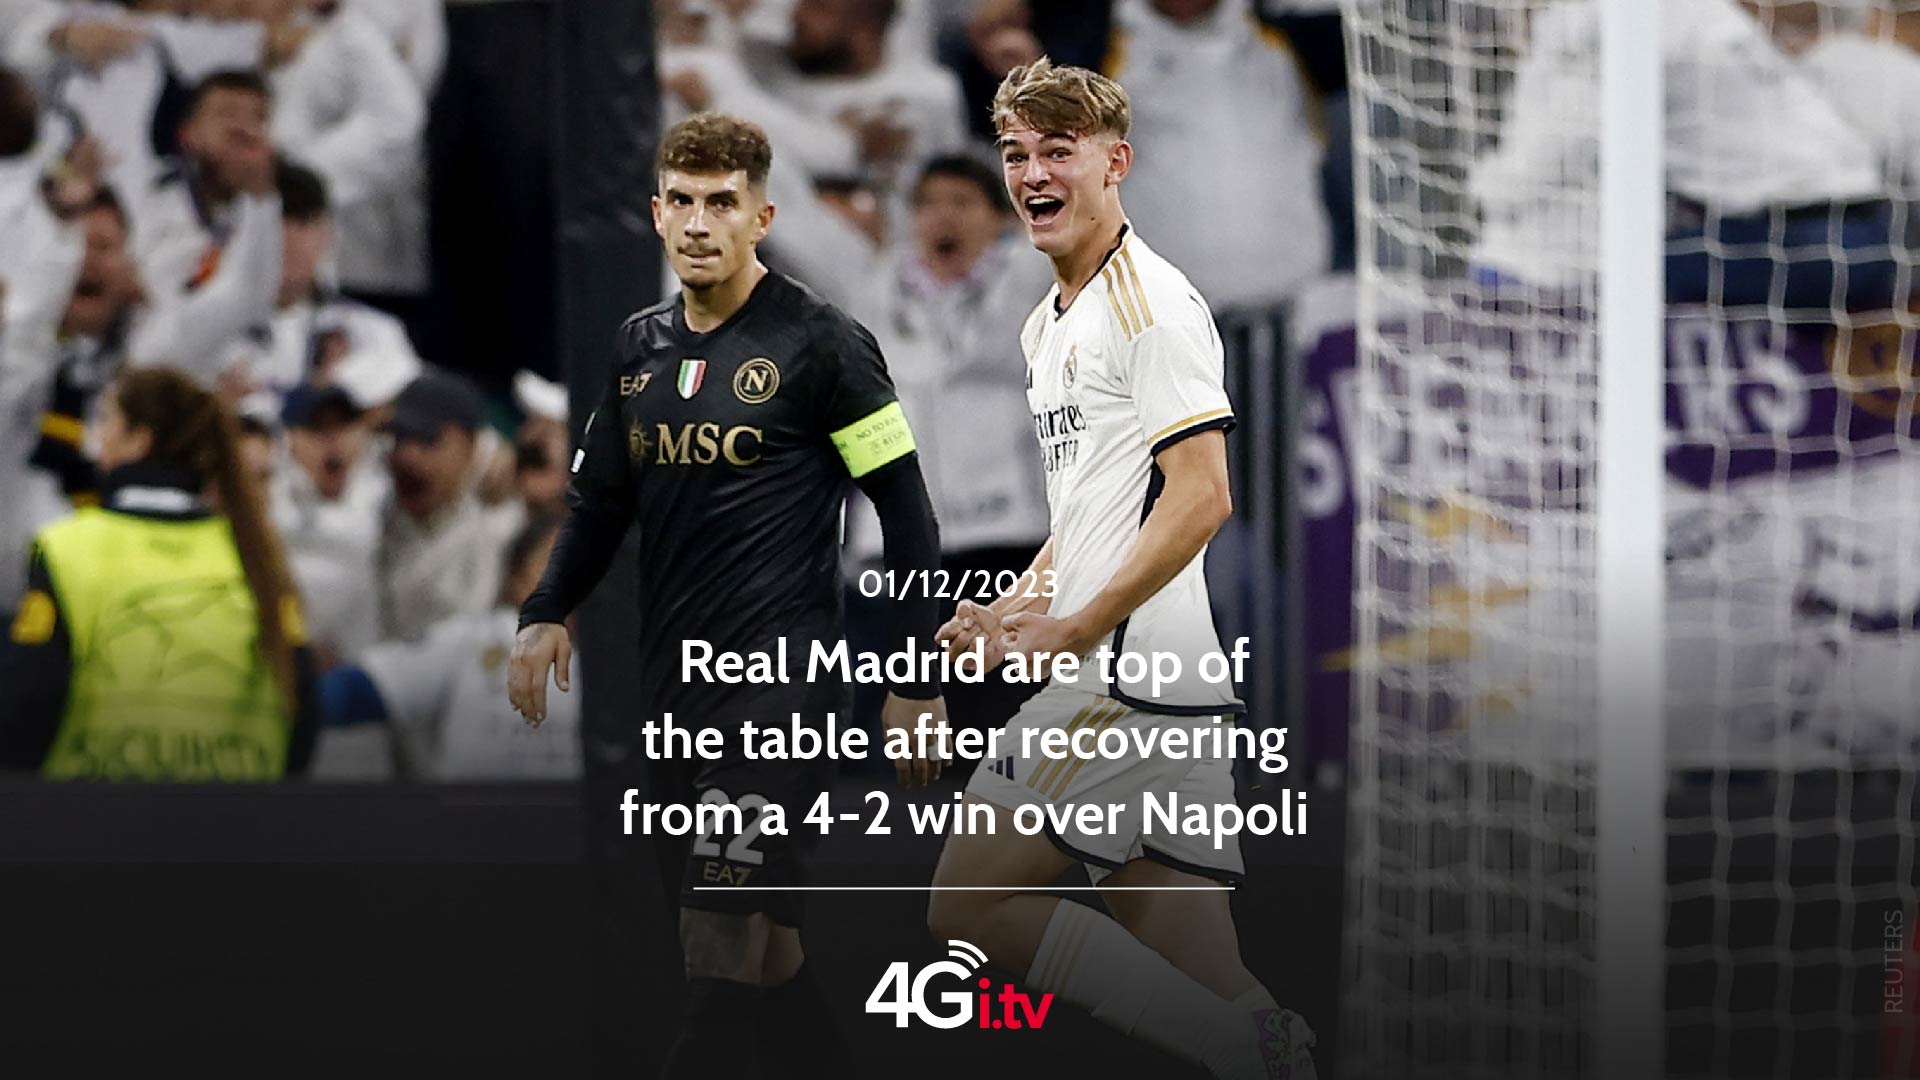 Lee más sobre el artículo Real Madrid are top of the table after recovering from a 4-2 win over Napoli